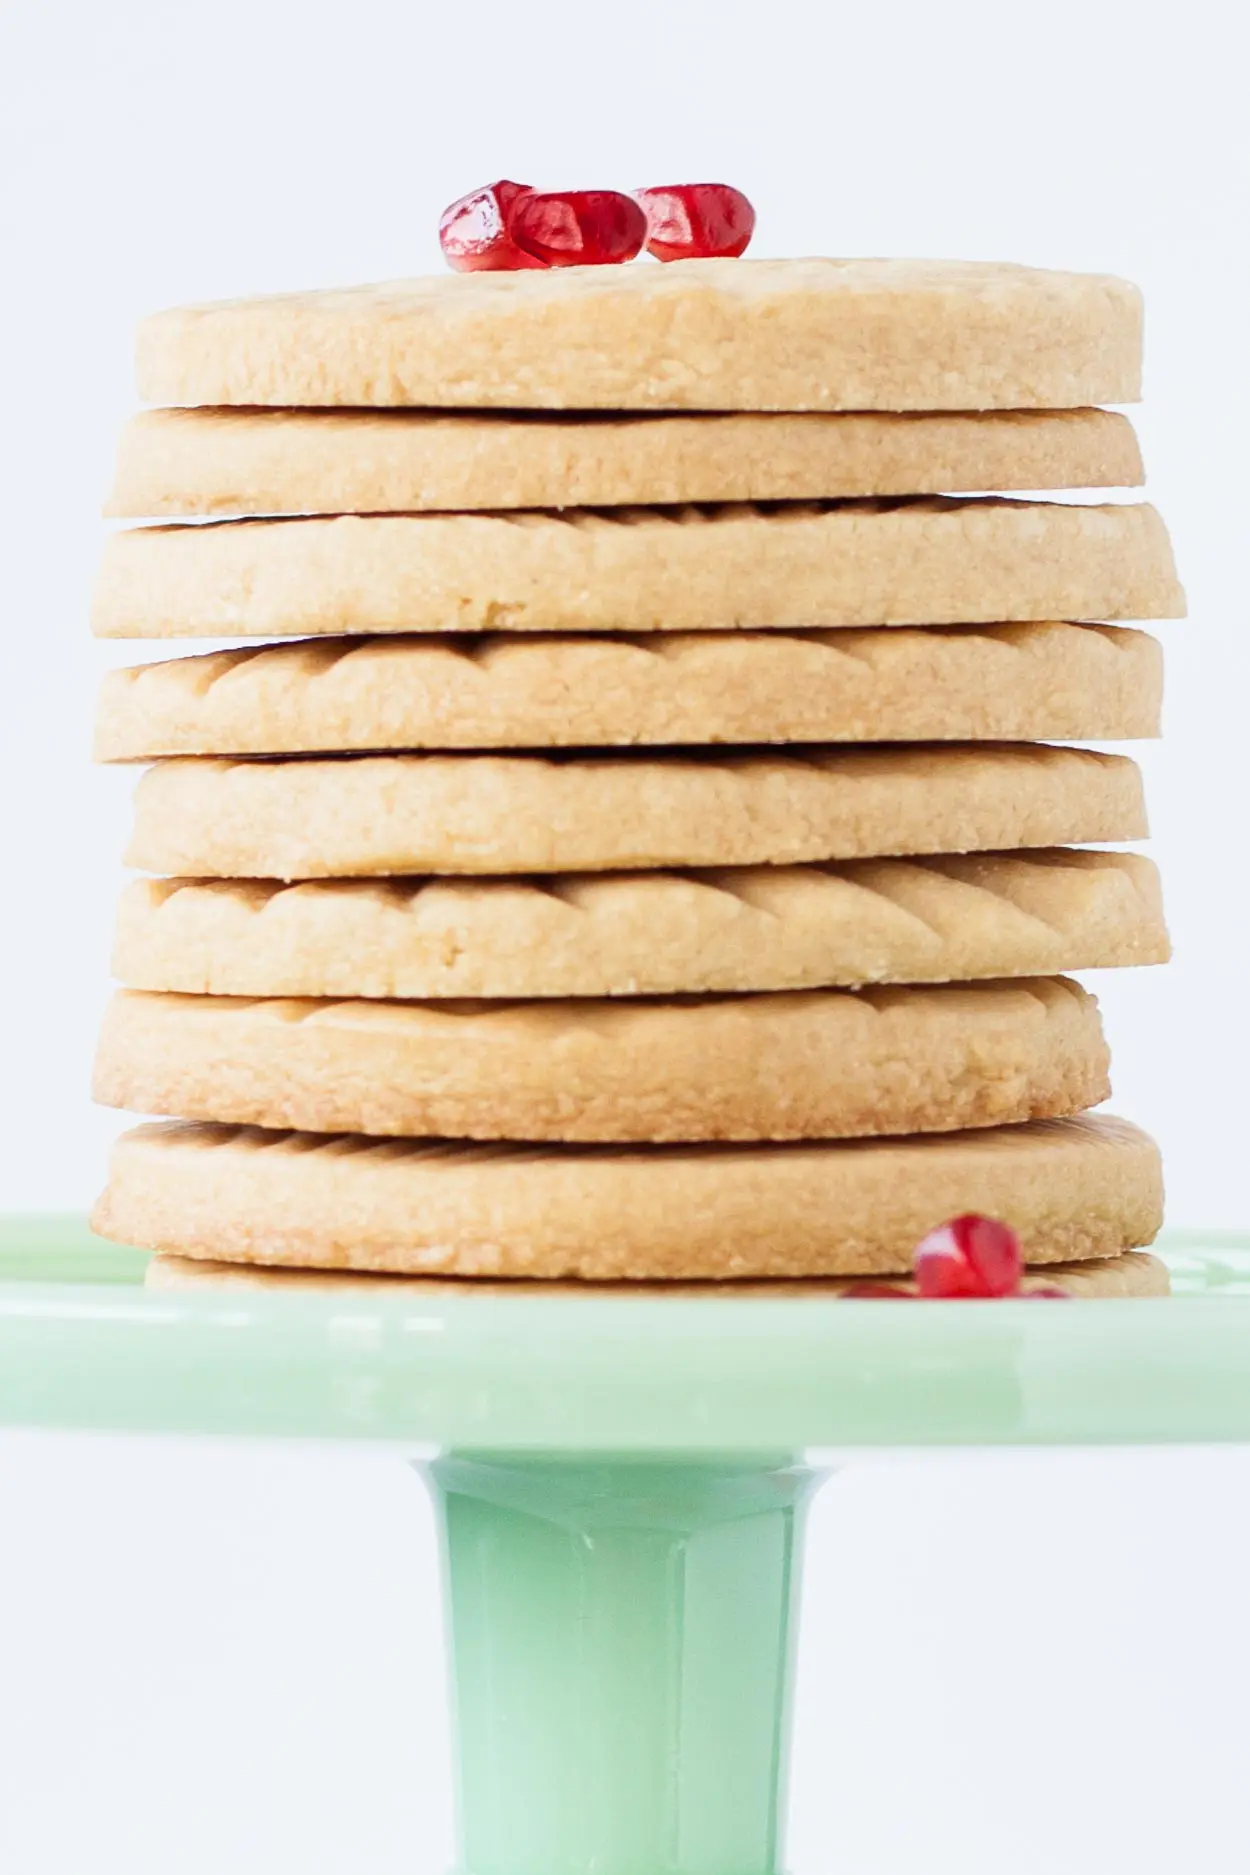 Stack of cookies on a green cake stand.